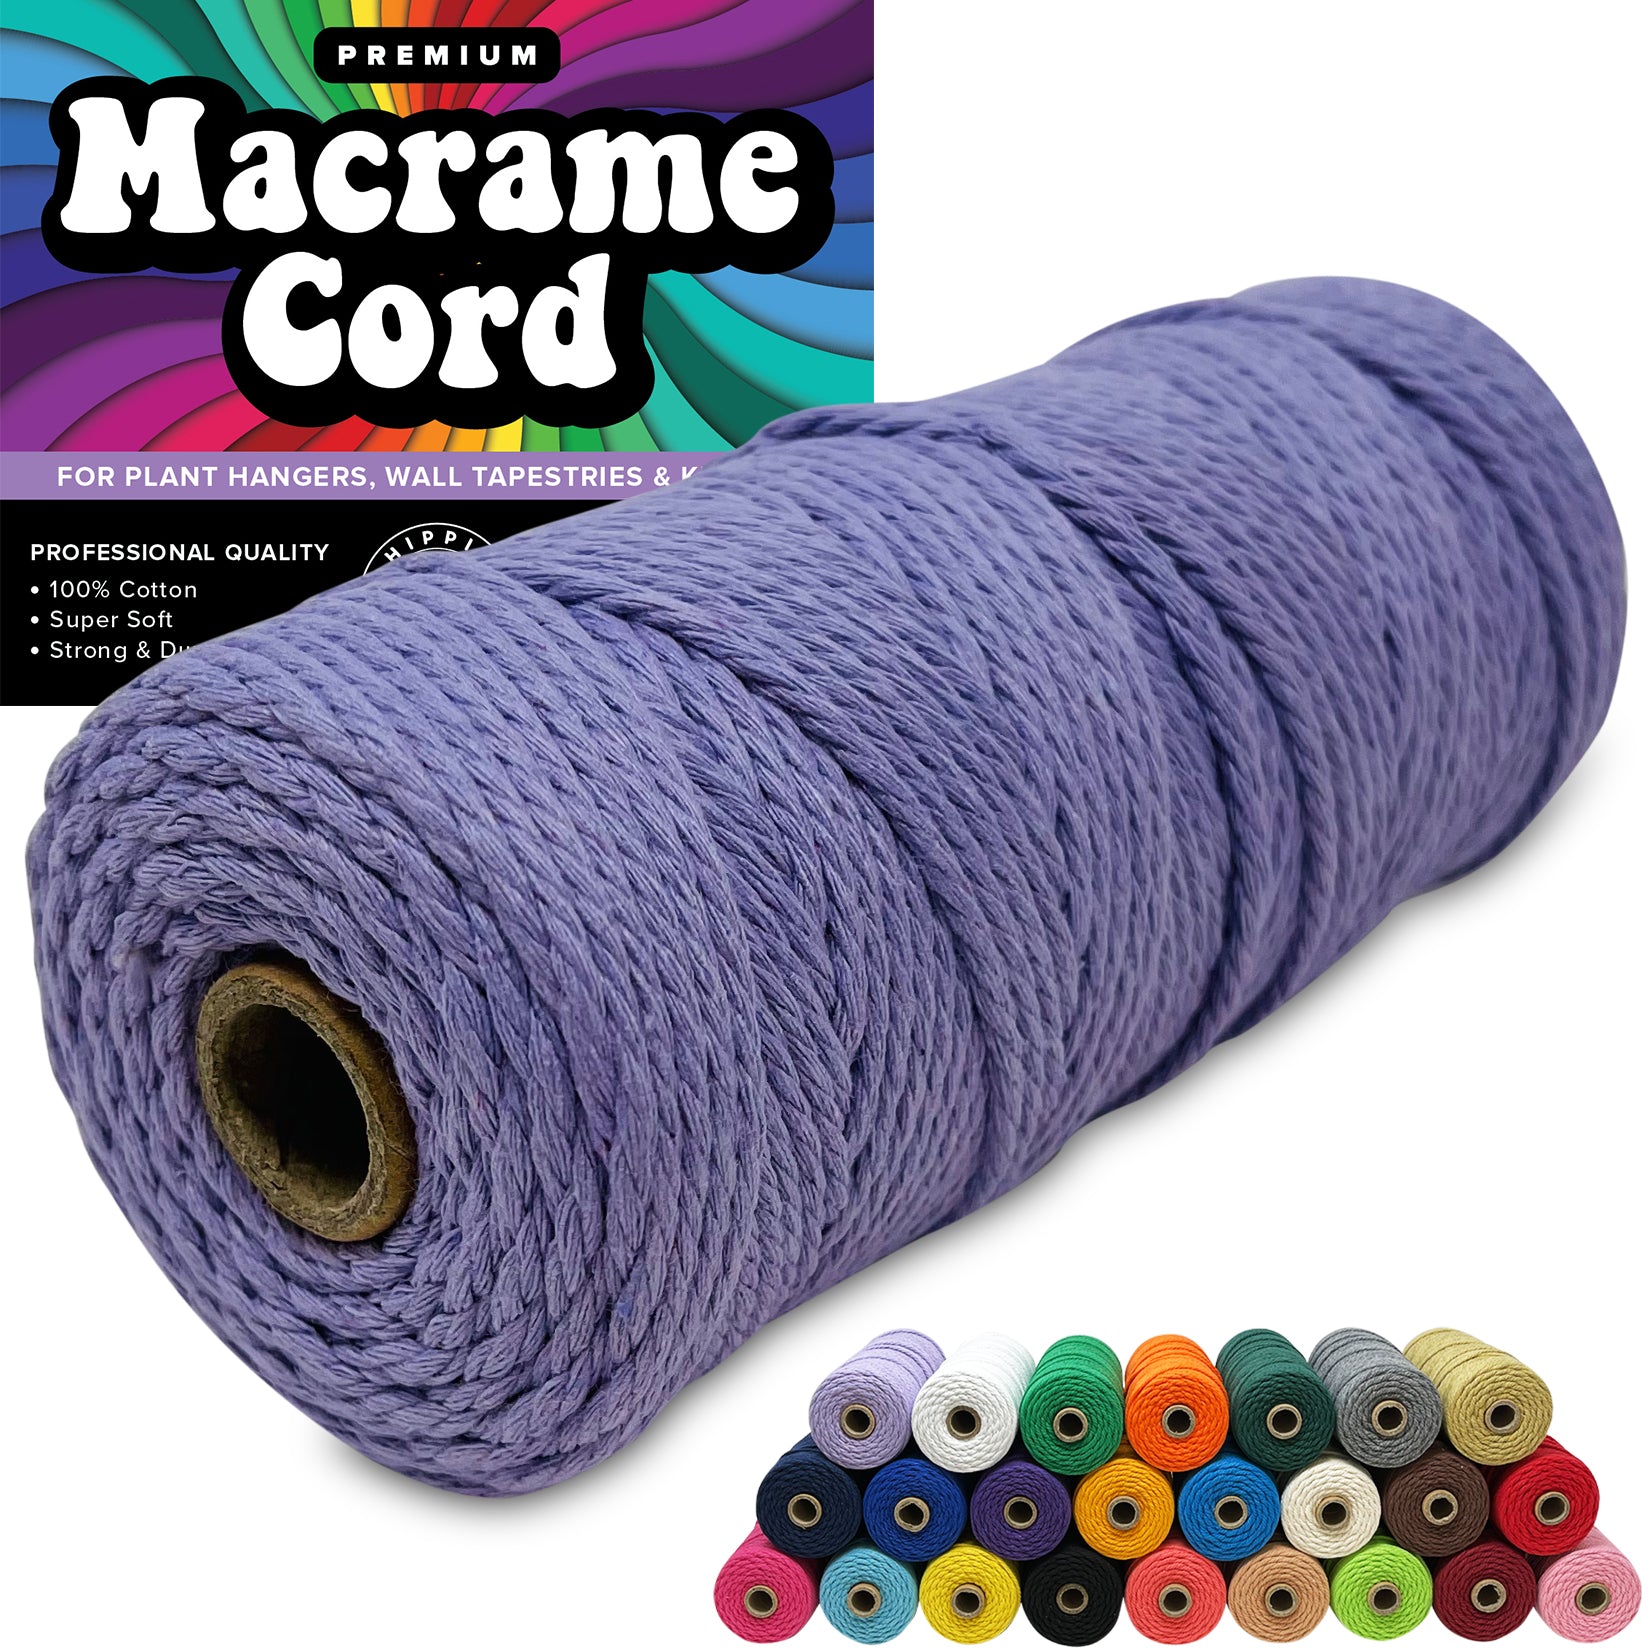 Periwinkle 100% Cotton Cord Rope for Macrame 3mm Natural and Colored Craft String Yarn Materials 325 Feet, adult Unisex, Size: Small, Purple